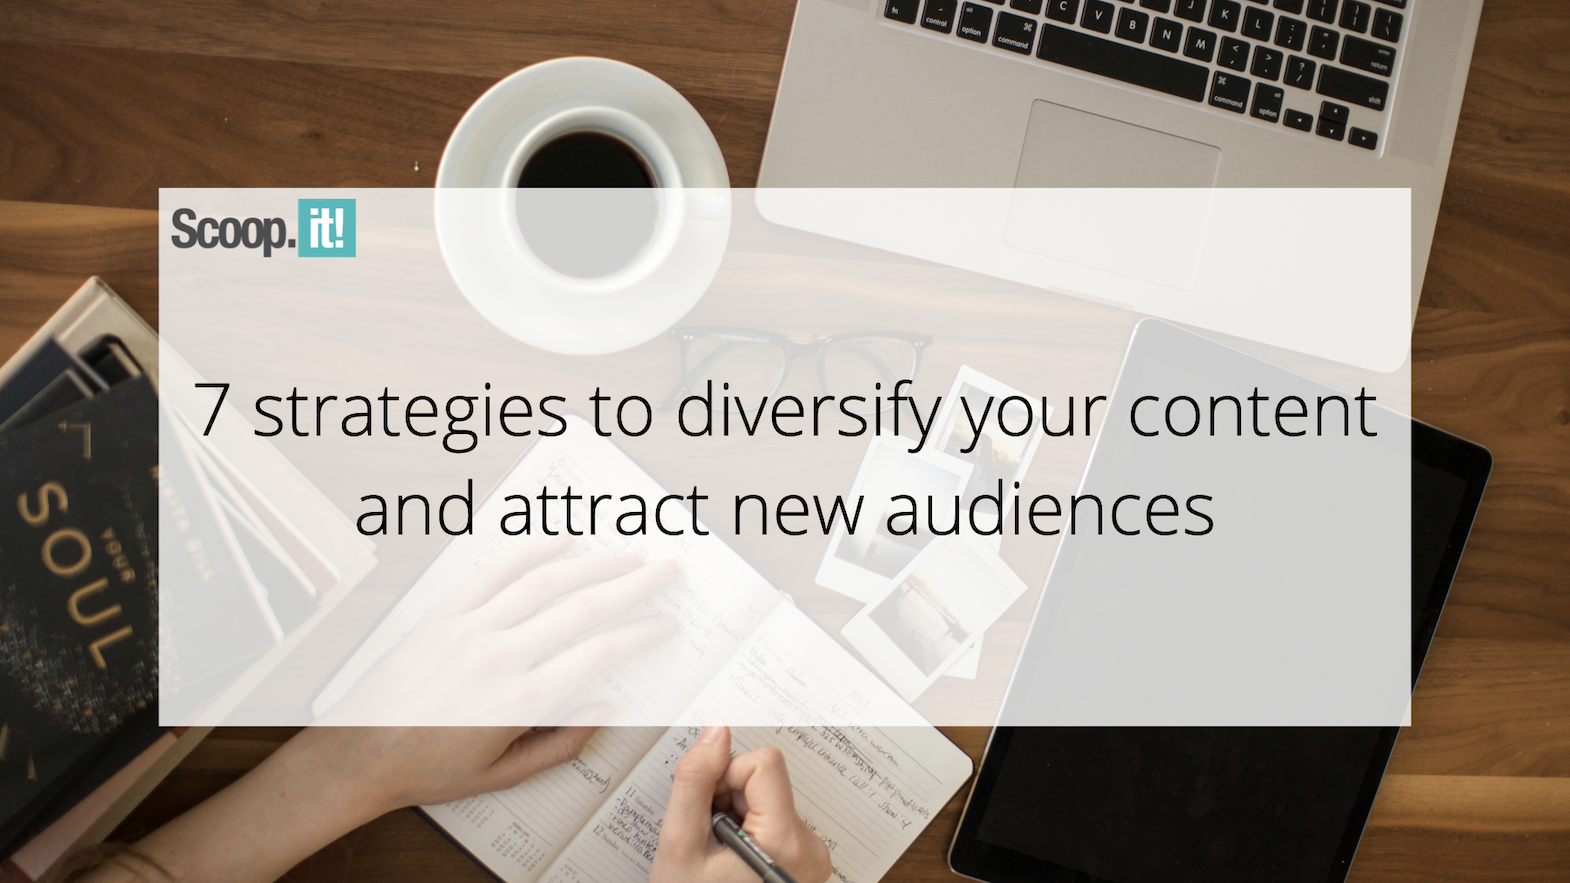 7-strategies-to-diversify-your-content-and-attract-new-audiences-–-scoop.it-blog